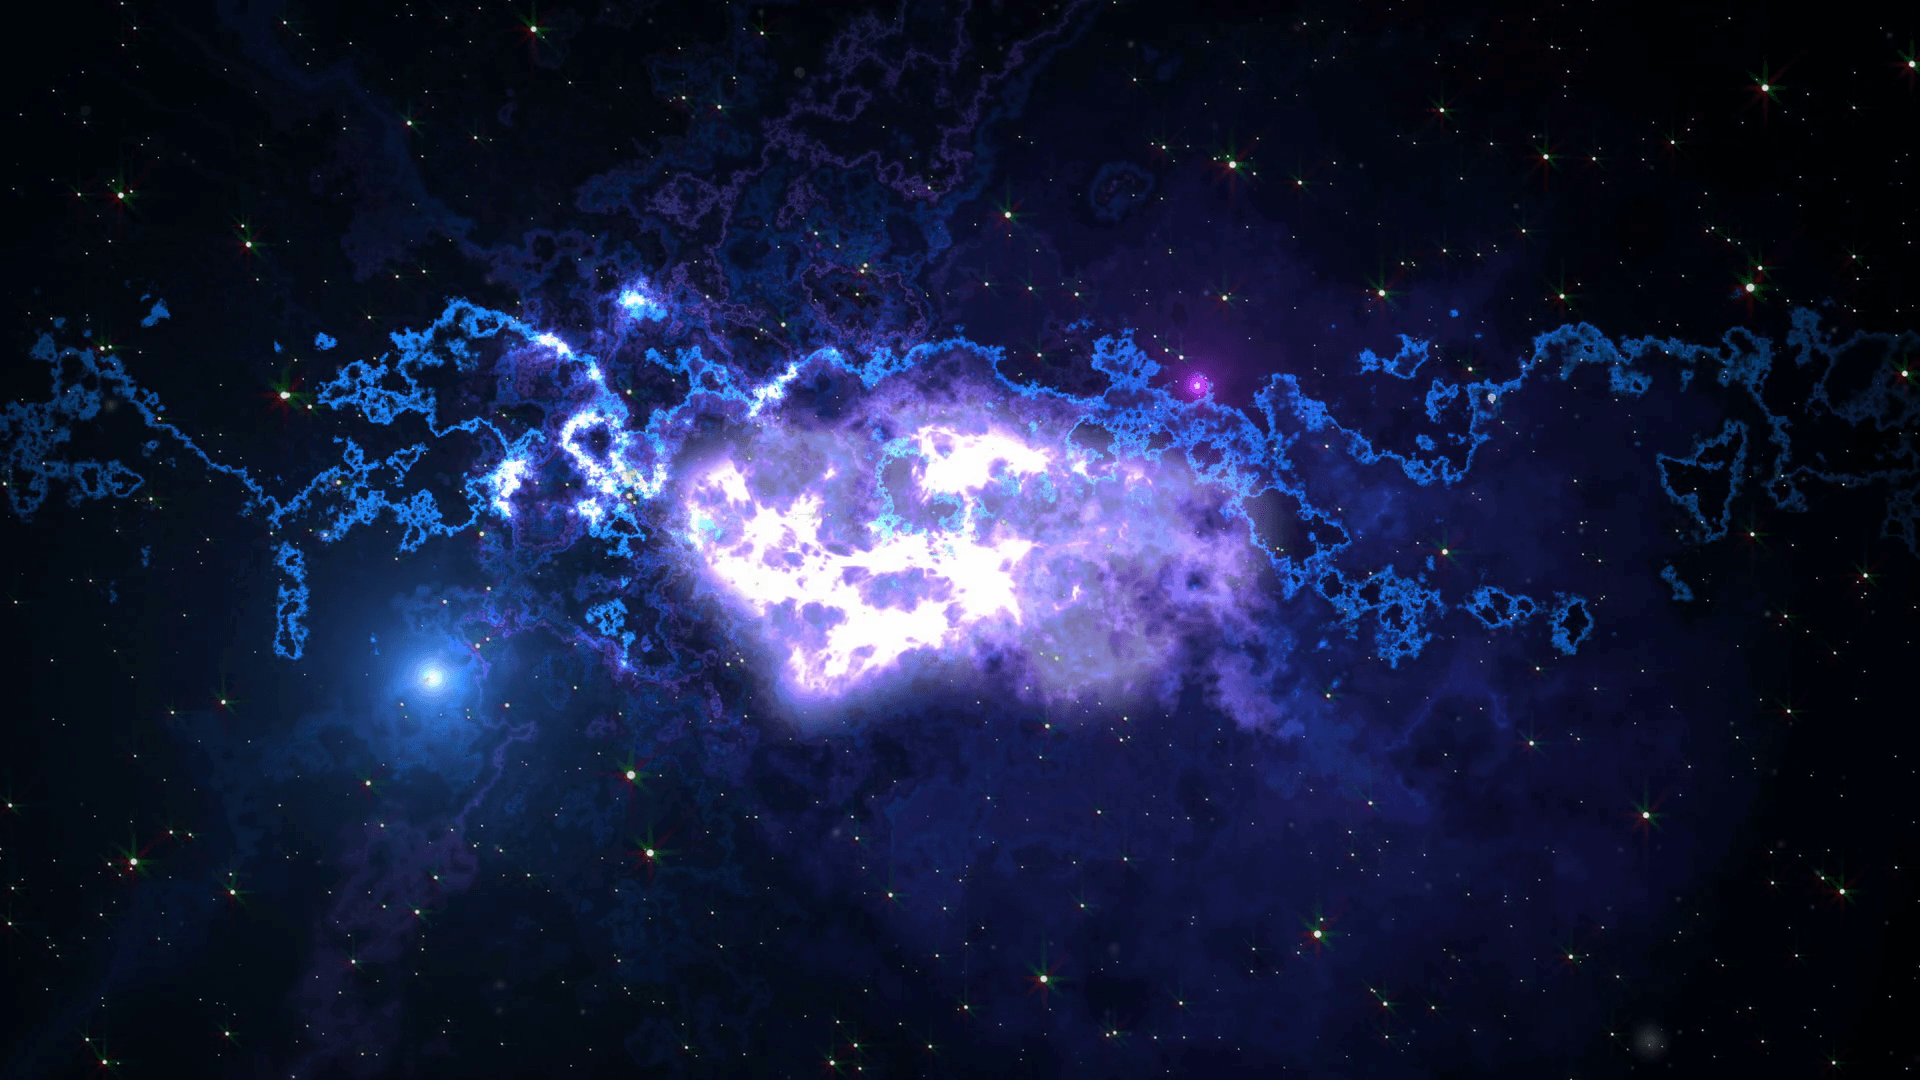 Space animation background with nebula, stars. The Milky Way